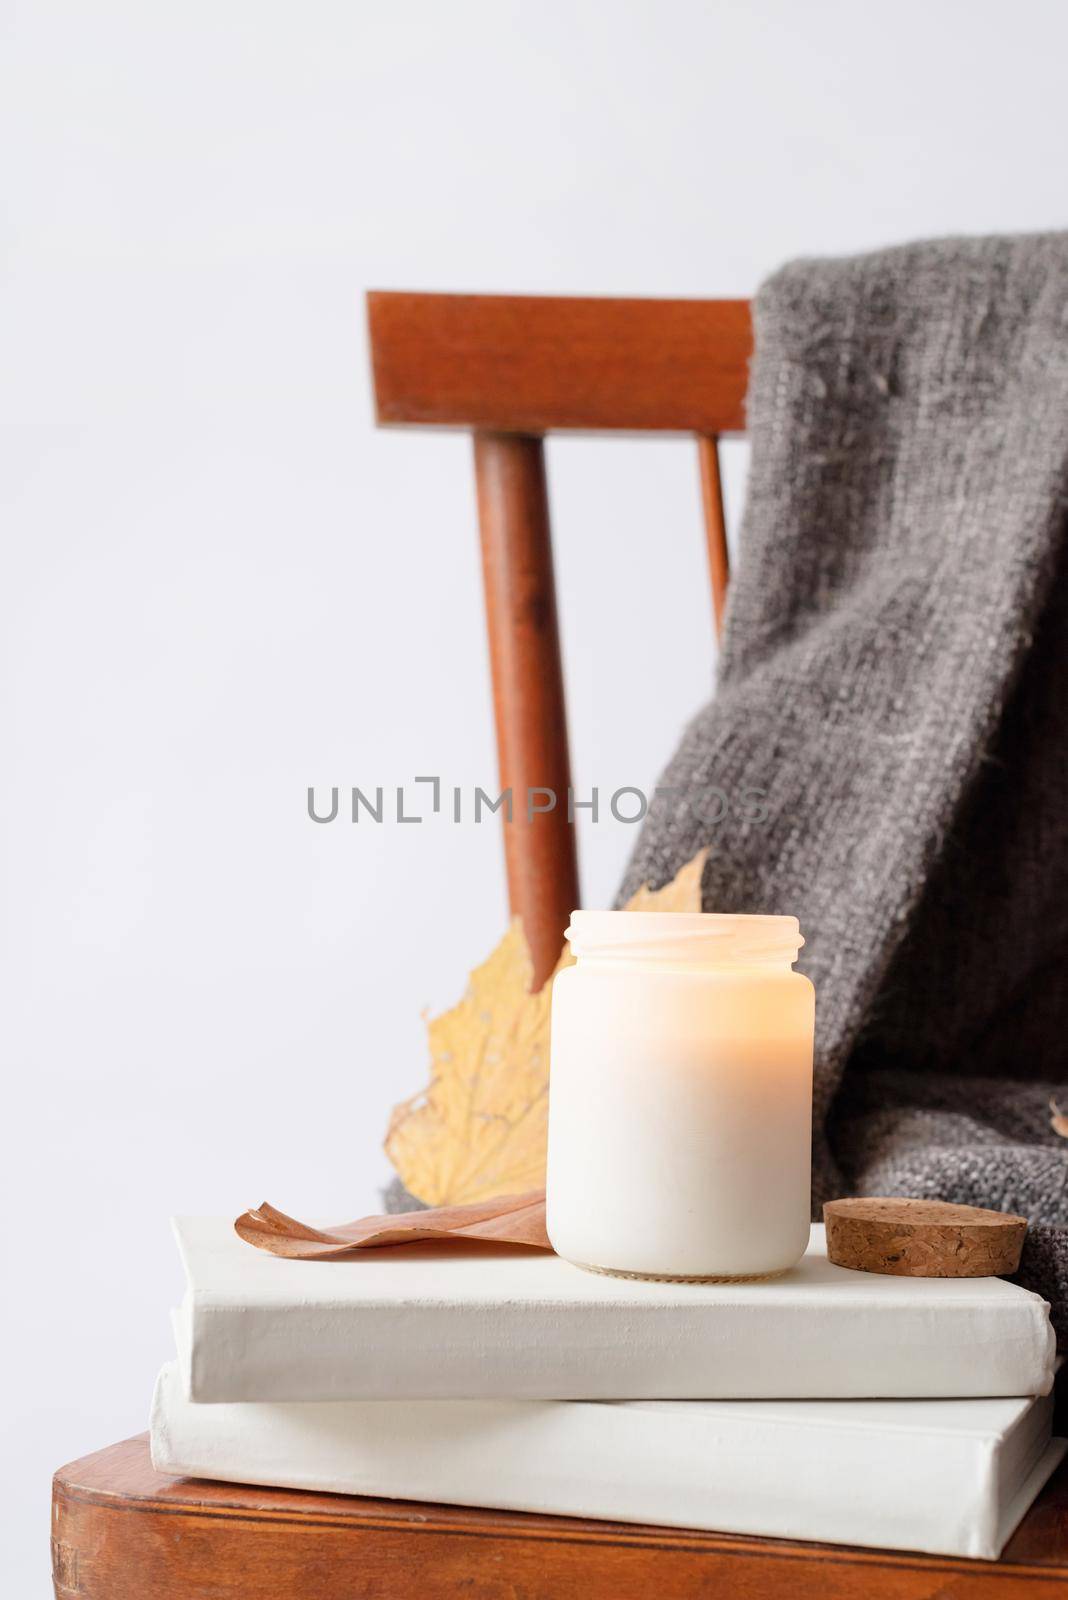 Hello fall. Cozy warm image. Candle mockup design. Cozy interior with old vintage chair, warm plaid, books and autumn leaves. Burning candle mockup design